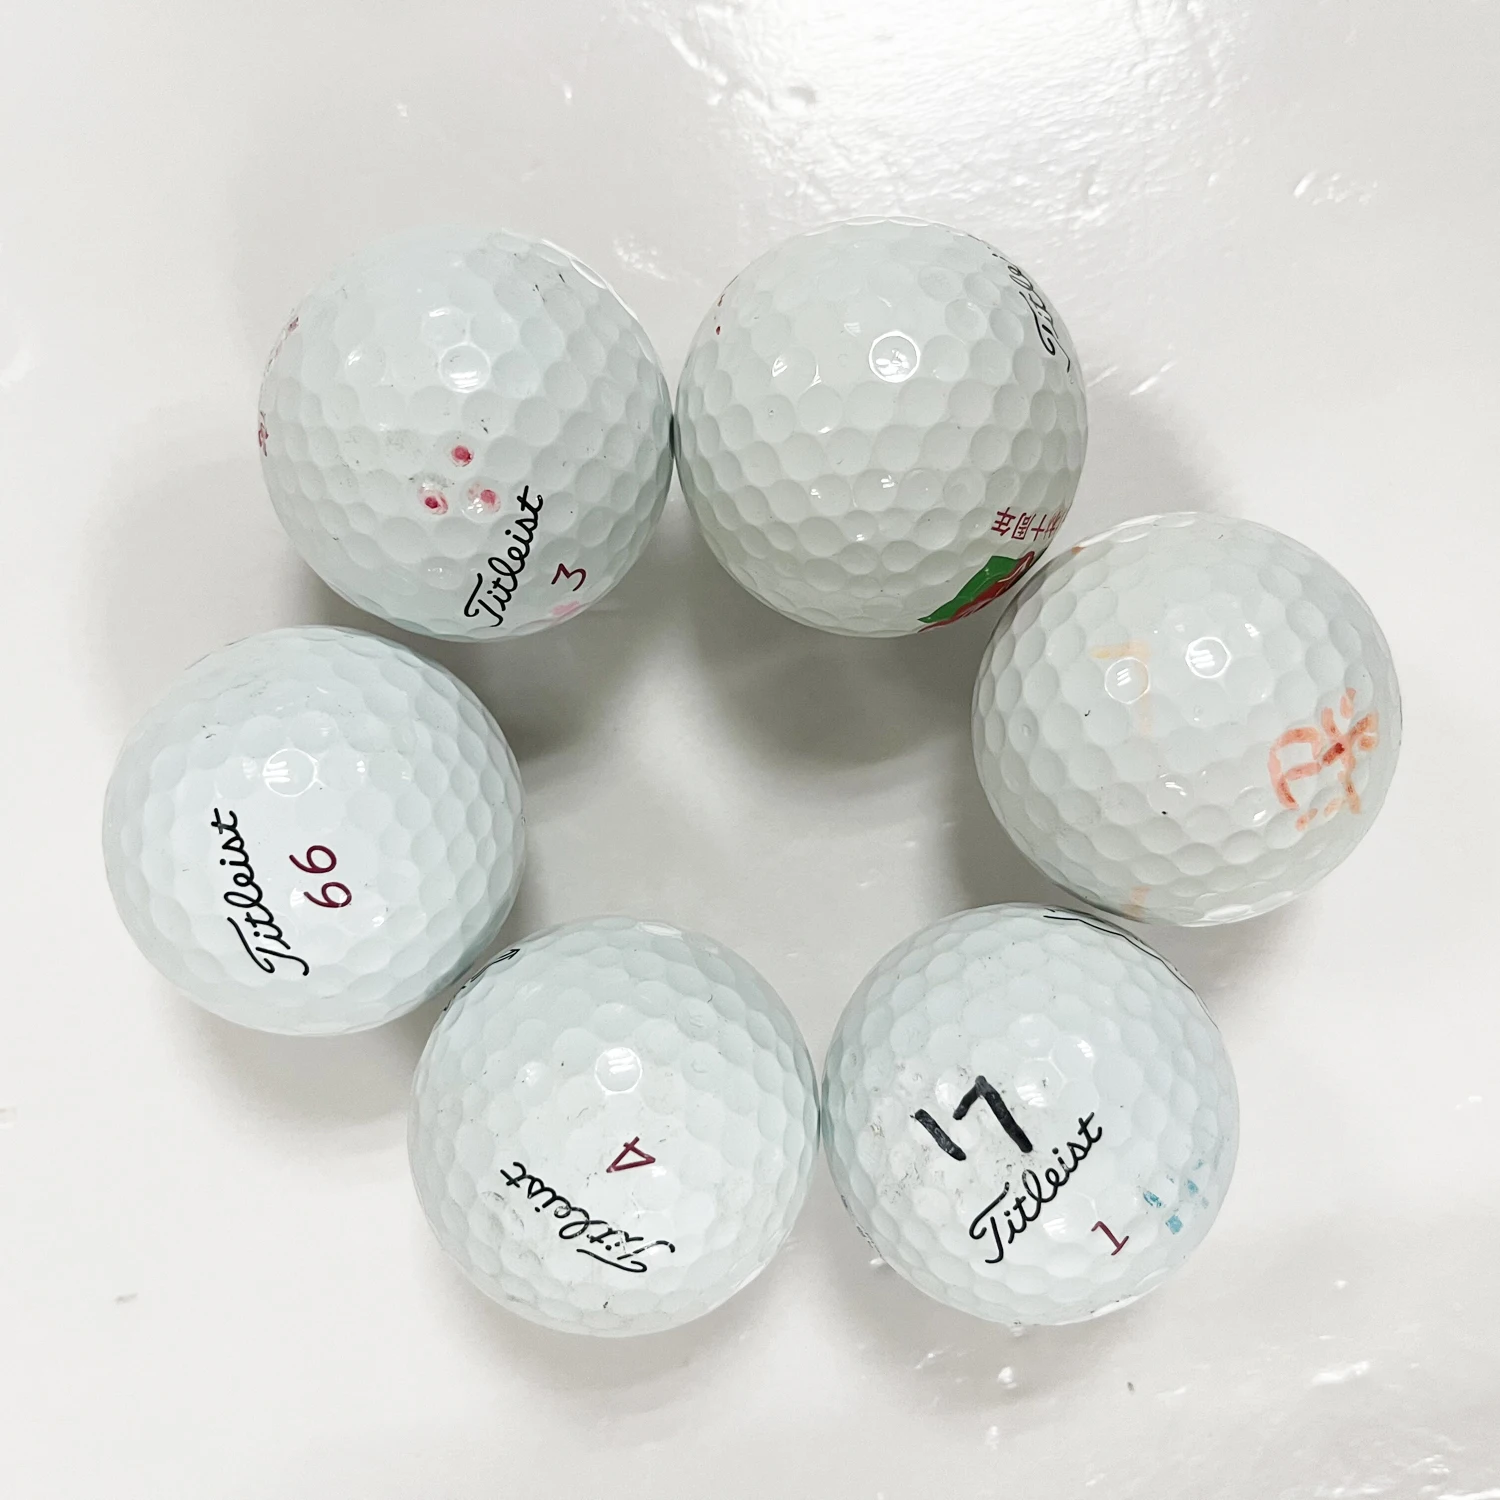 Wholesale Bulk Golfballs Perfect For Practice & Range Hitting Recycled ...